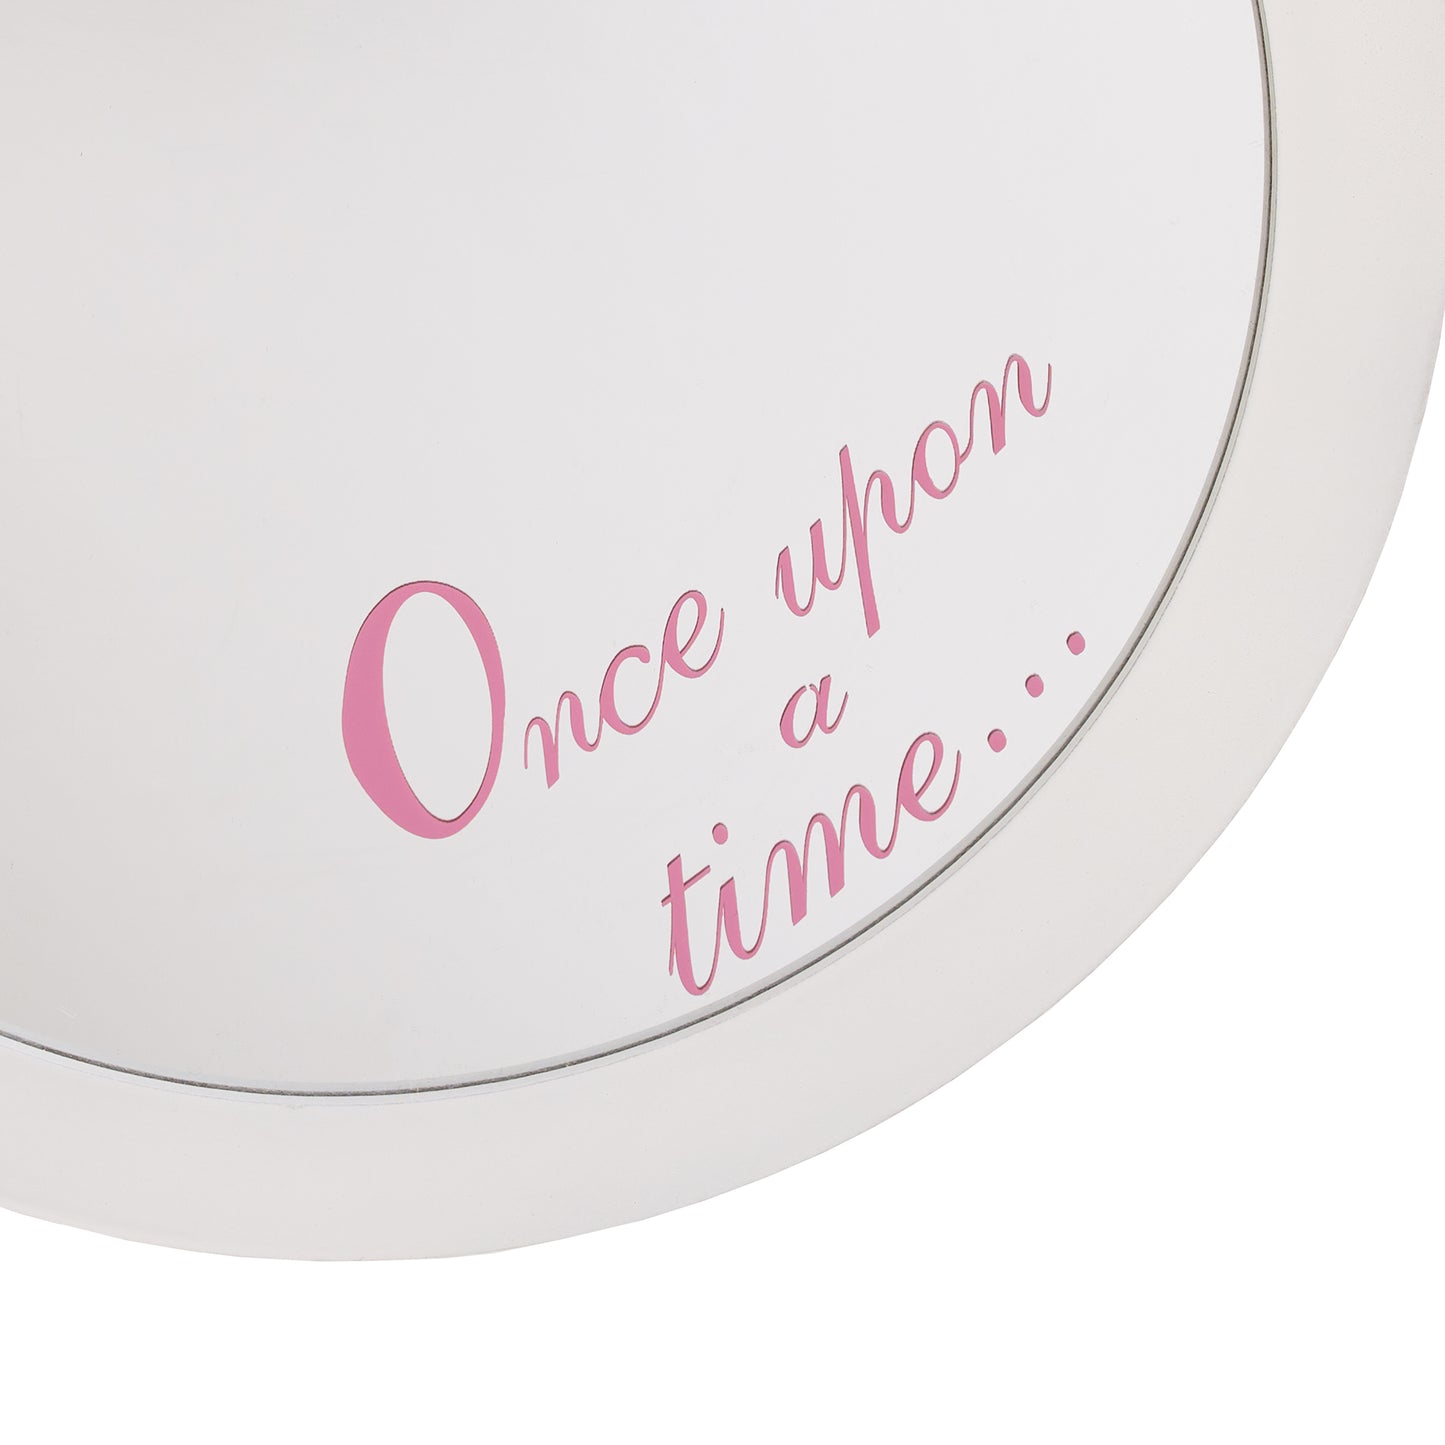 Disney Once Upon a Time Princess White Round Wooden Framed Wall Mirror with Pink Tiara